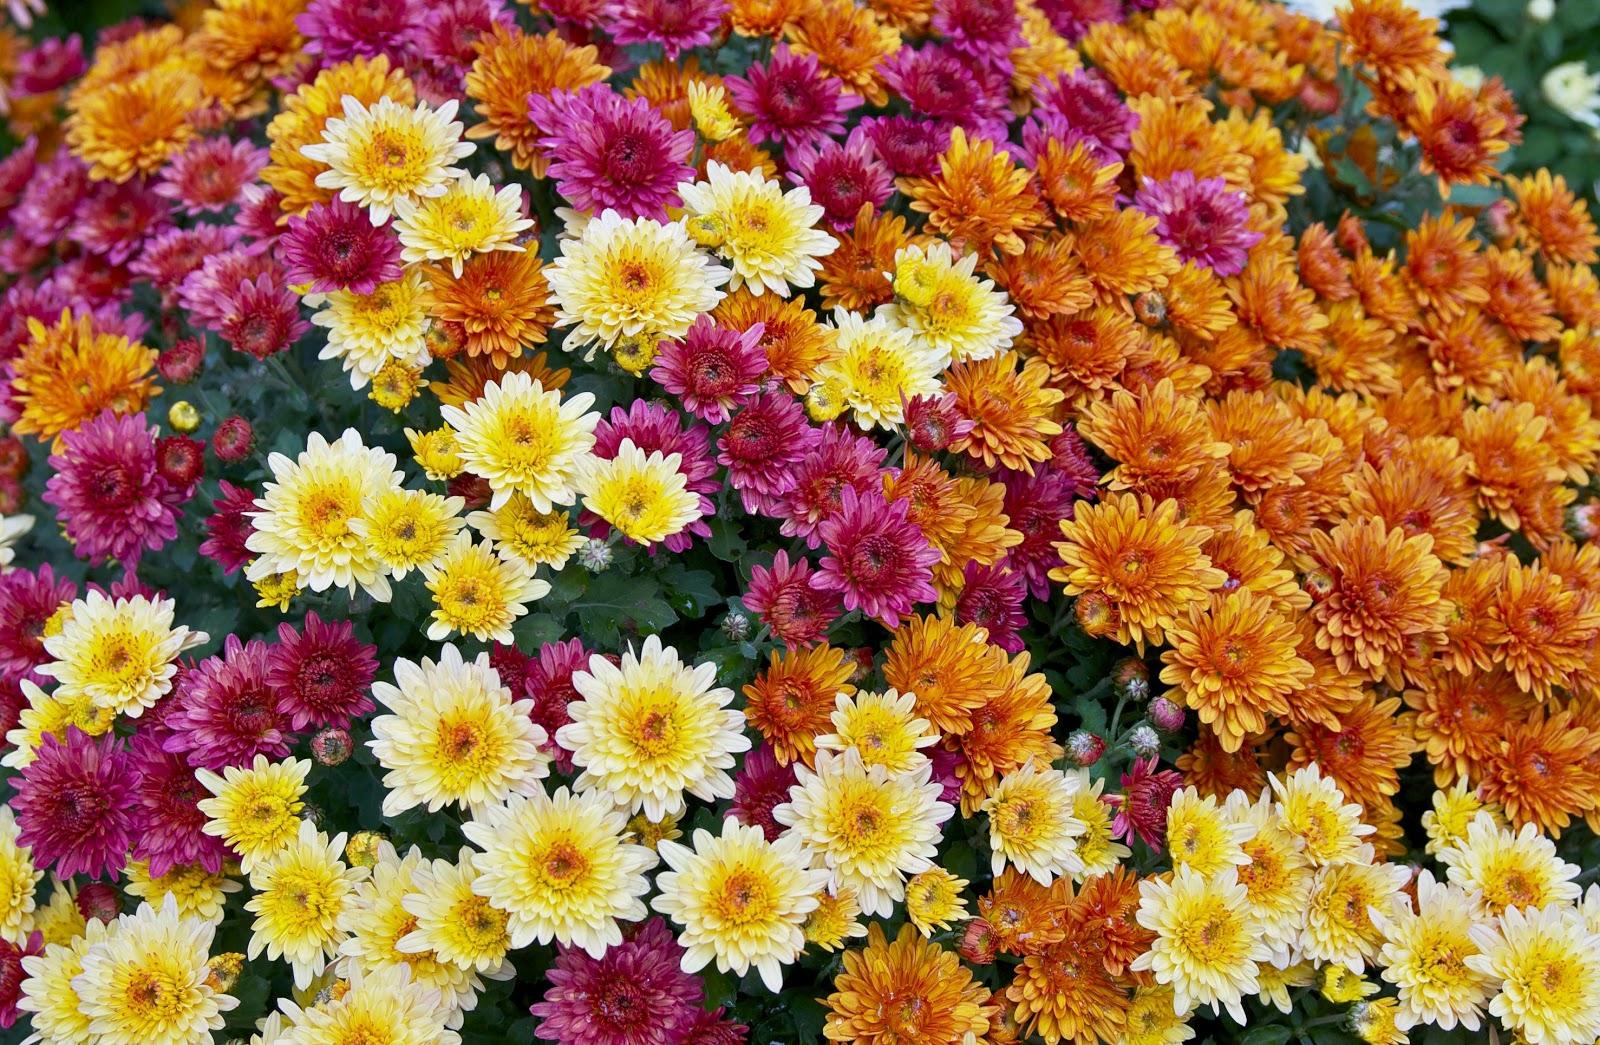 Chrysanthemum flowers are the source of pyrethrins, widely available insecticides that may be toxic to bees and fish. Photo: Wikimedia Commons